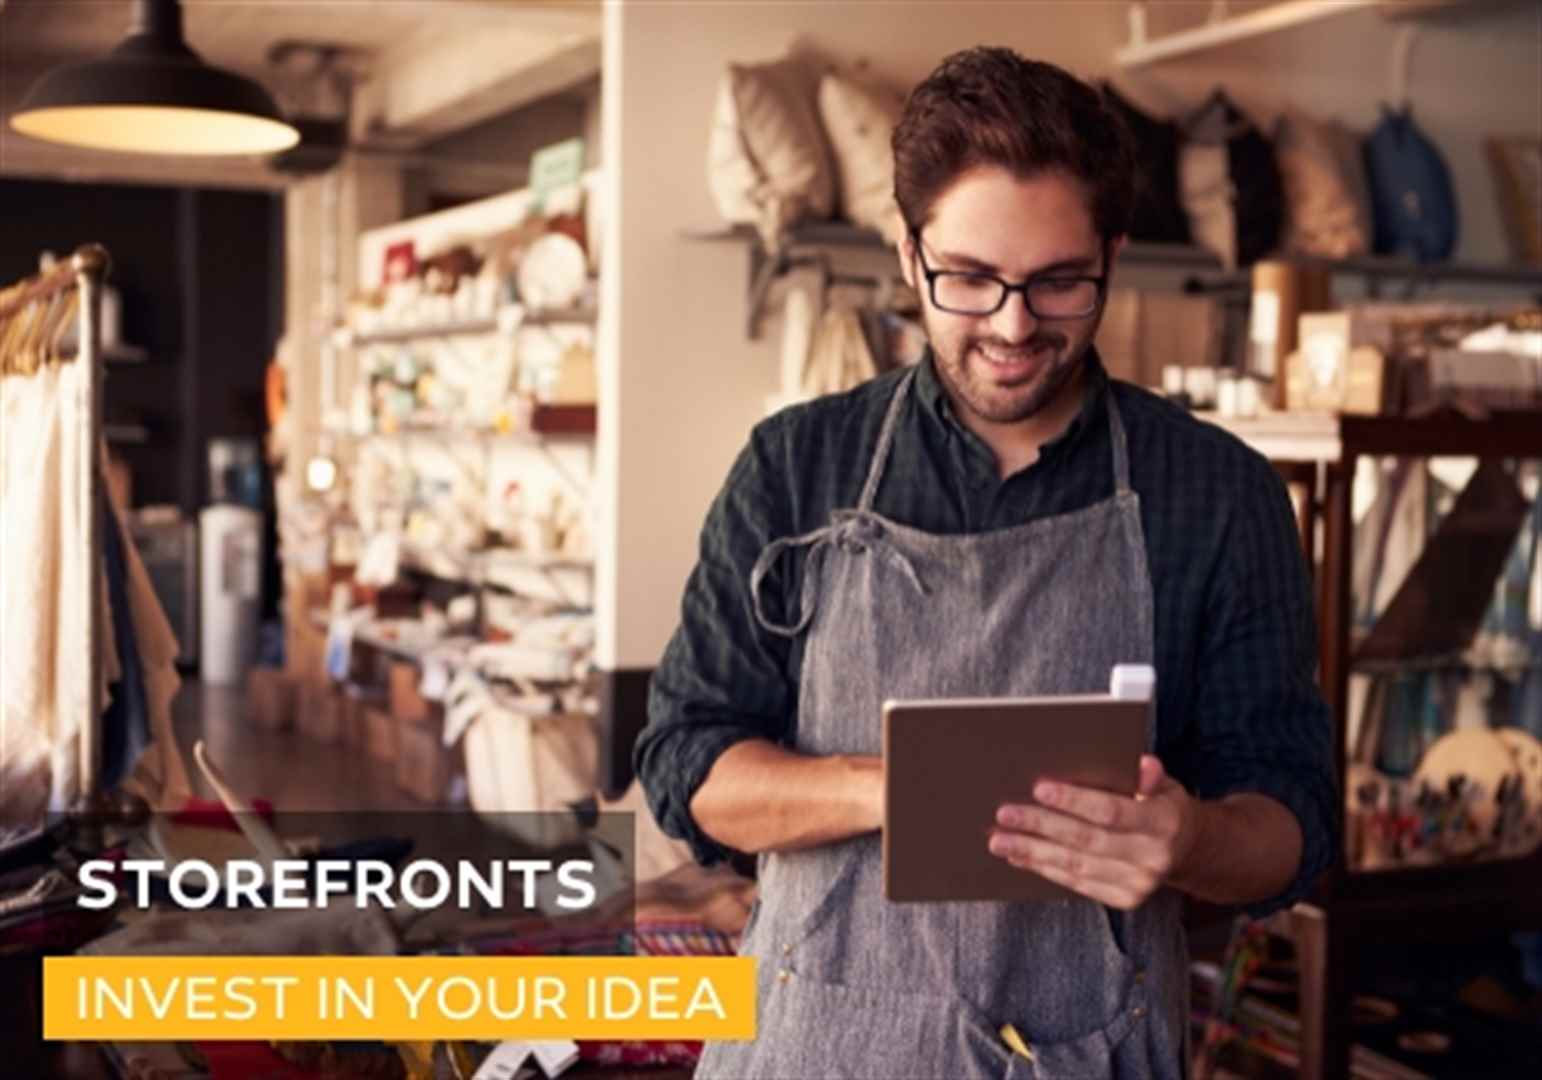 Storefronts - Invest in your idea